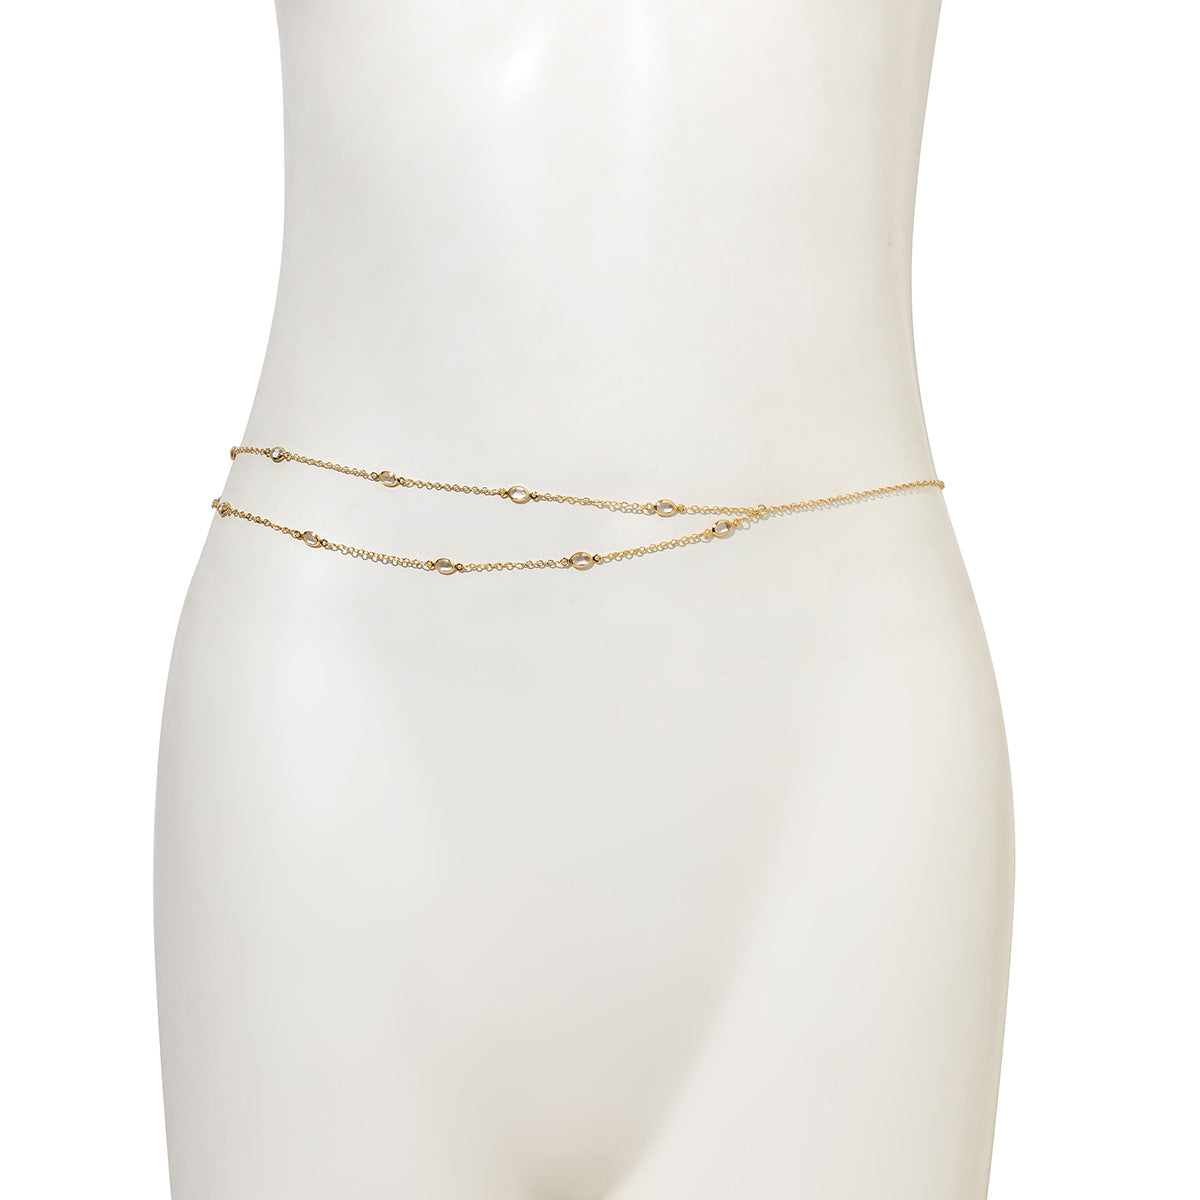 Elegant Zircon Waist Chain Necklace and Body Chain from Vienna Verve Collection